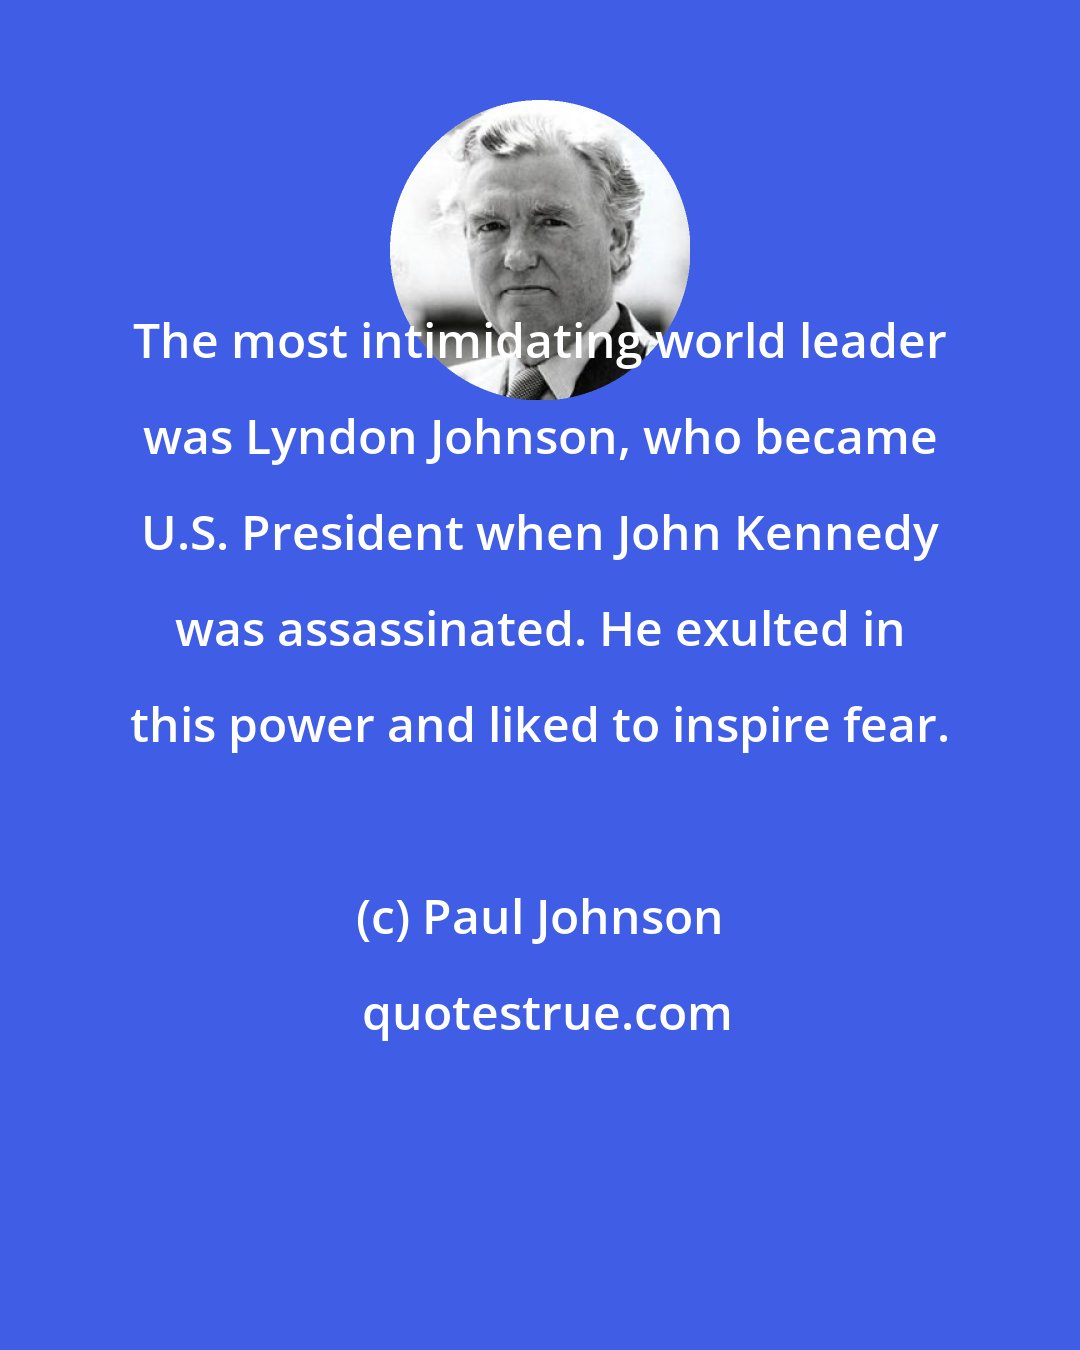 Paul Johnson: The most intimidating world leader was Lyndon Johnson, who became U.S. President when John Kennedy was assassinated. He exulted in this power and liked to inspire fear.